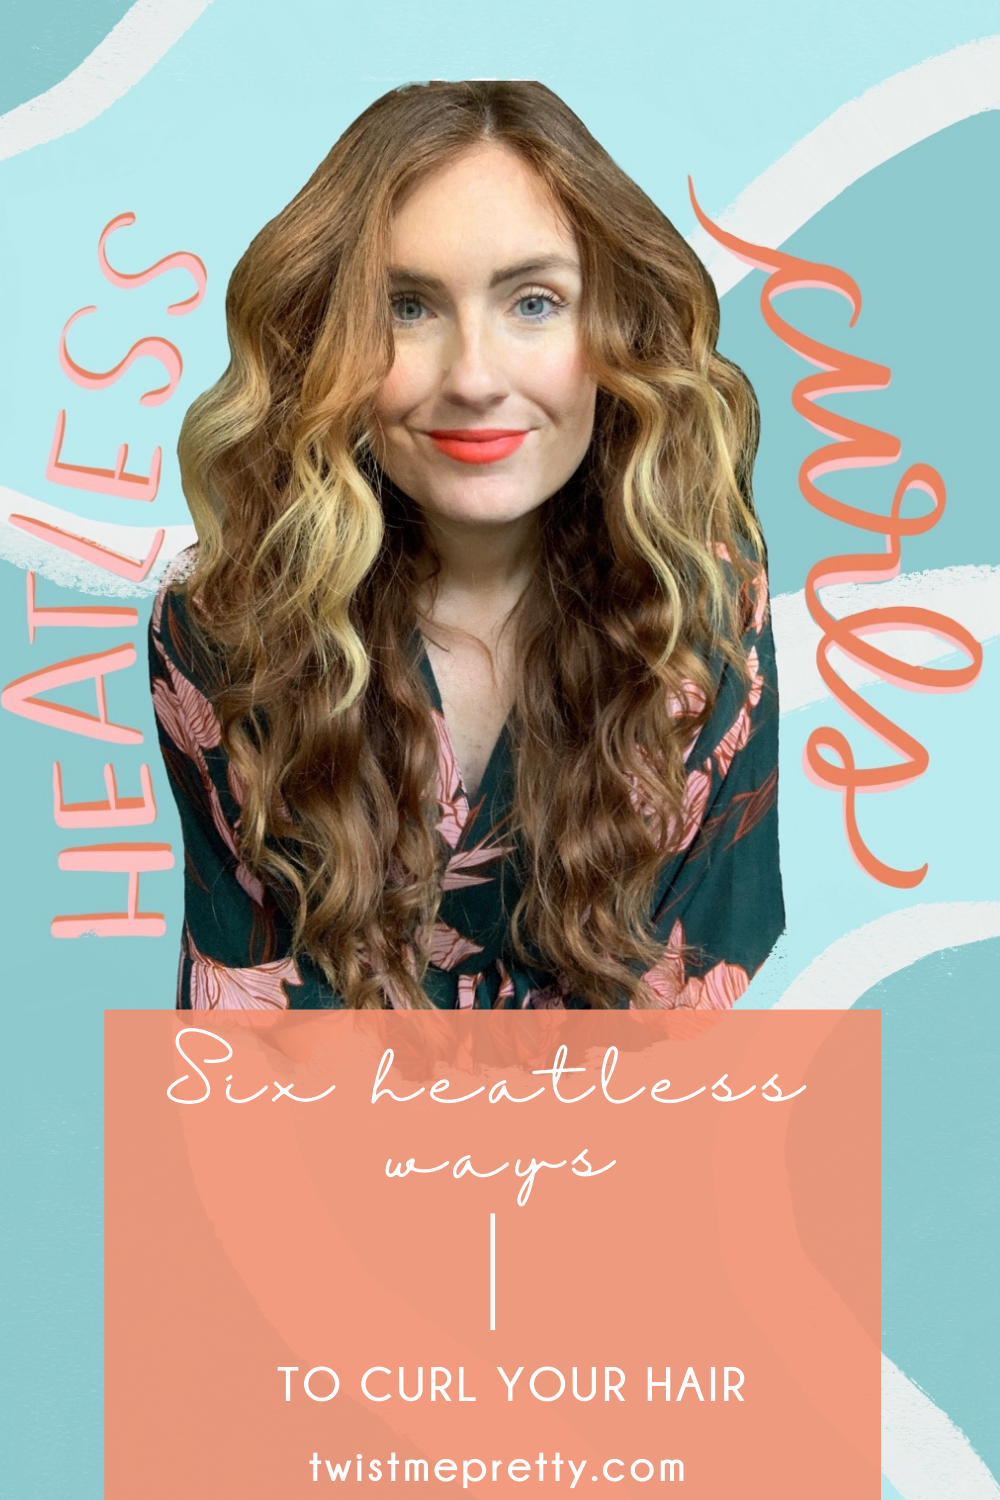 6 creative ways to curl your hair without using heat! www.twistmepretty.com